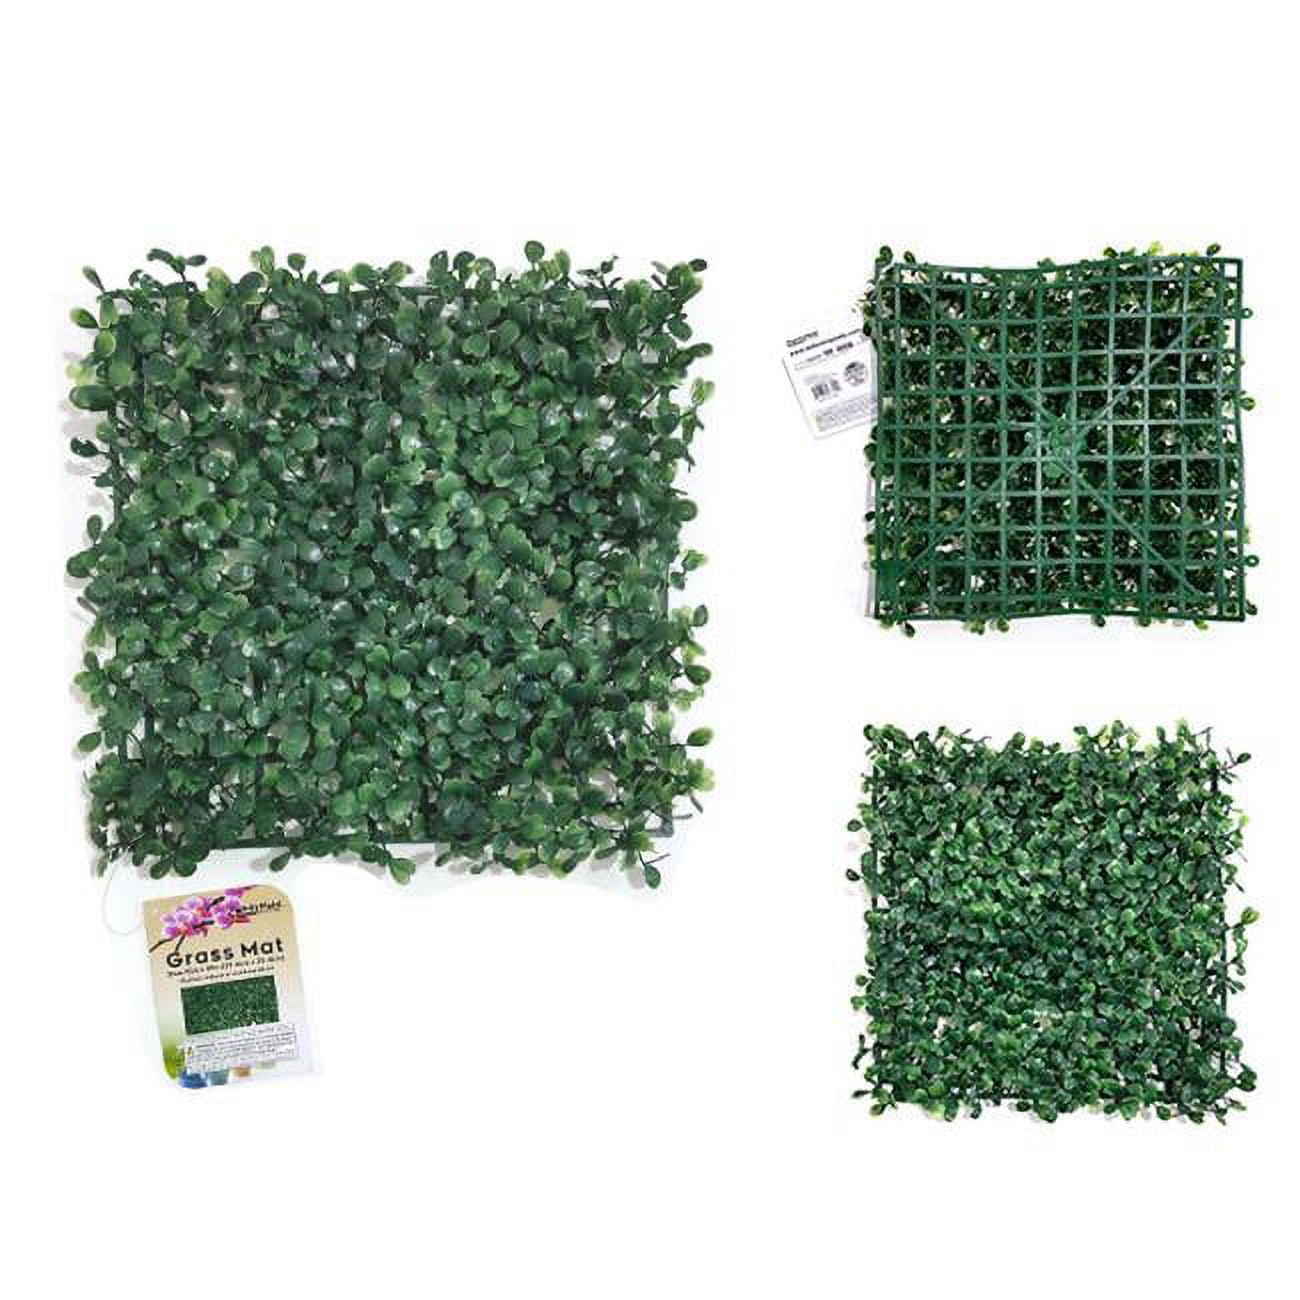 Picture of Familymaid 27724 10 x 10 in. Grass Mat